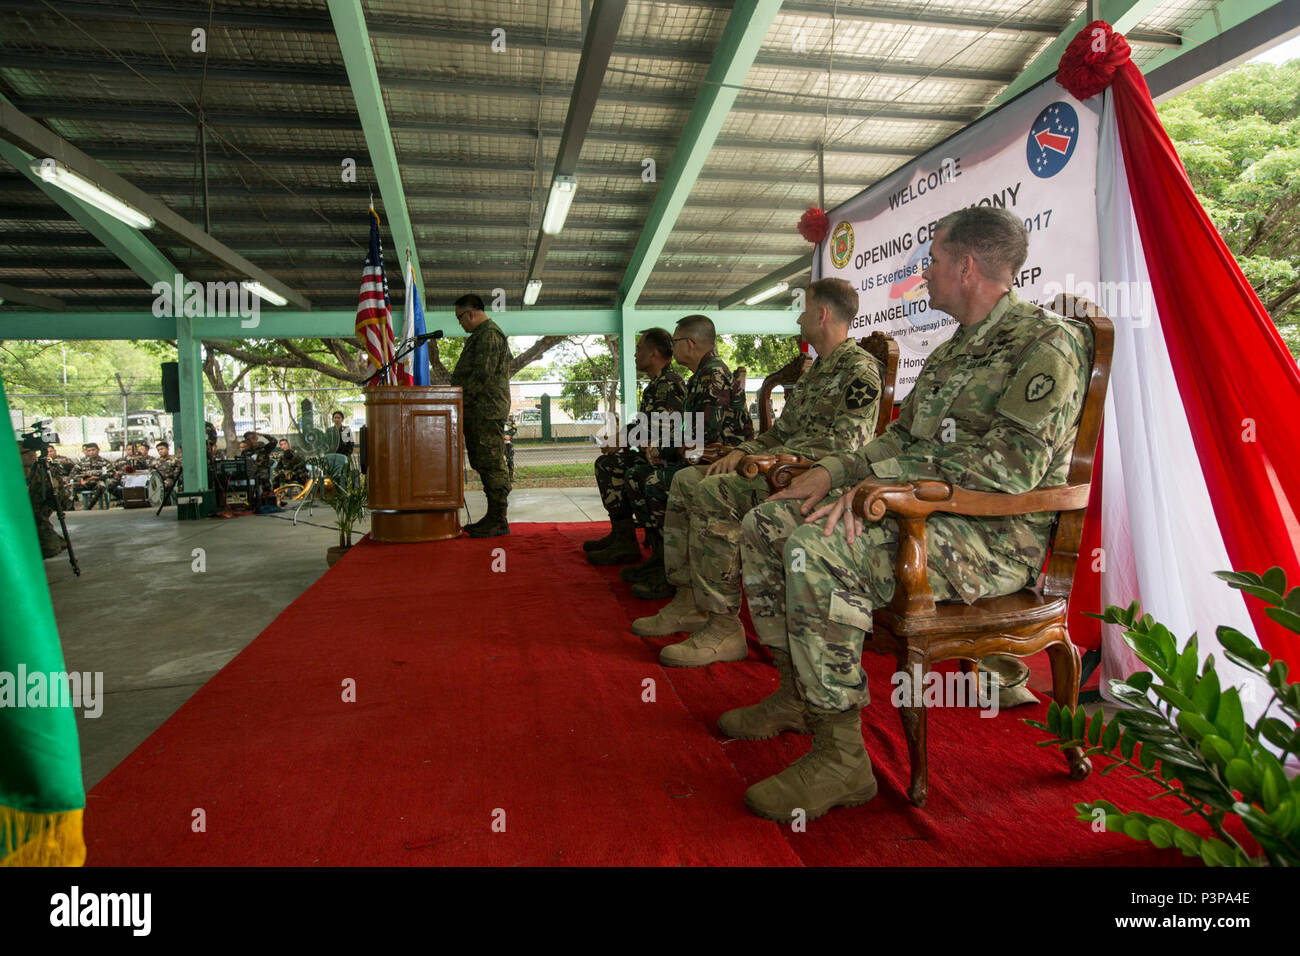 Philippine Army Col. Laurence Mina delivers his remarks during the opening ceremony of Balikatan 2017 at Fort Magsaysay in Santa Rosa, Nueva Ecija, May 8, 2017. Mina is Deputy Assistant Chief of Staff for Training and Education Staff, Philippine Army. Balikatan is an annual U.S.-Philippine bilateral military exercise focused on a variety of missions including humanitarian and disaster relief, counterterrorism, and other combined military operations. Stock Photo